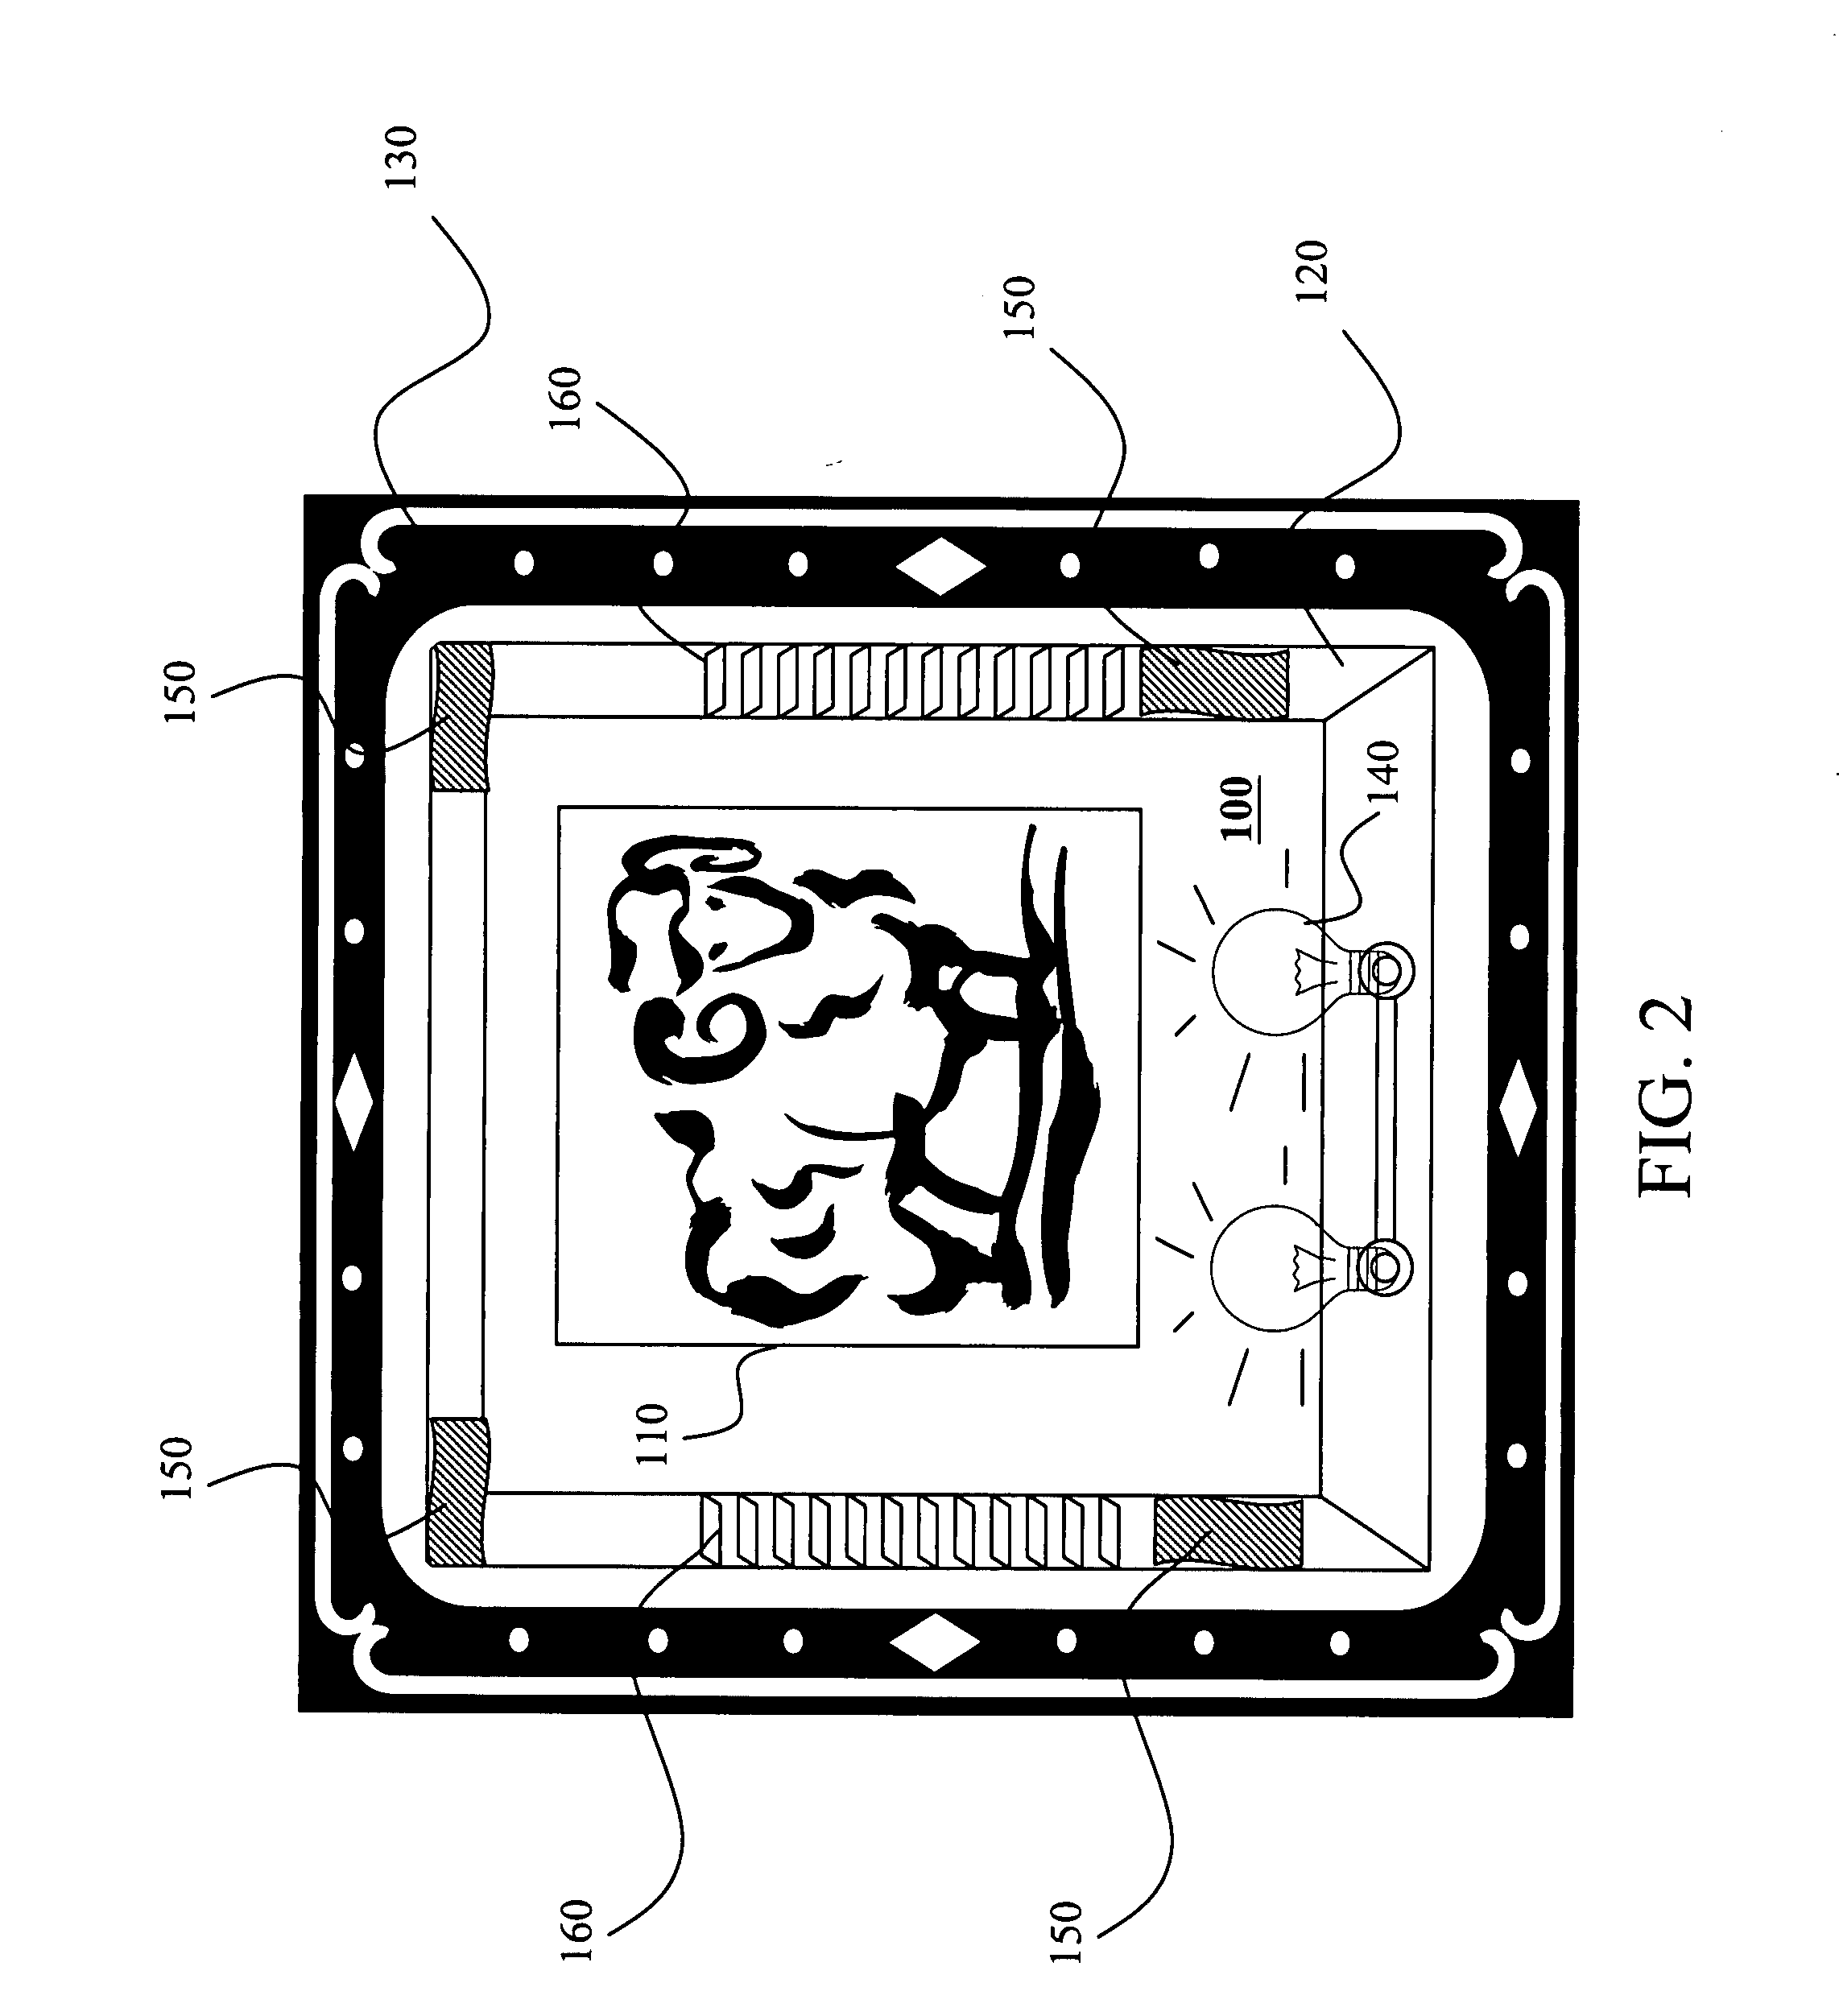 Frame structure with built-in illumination device